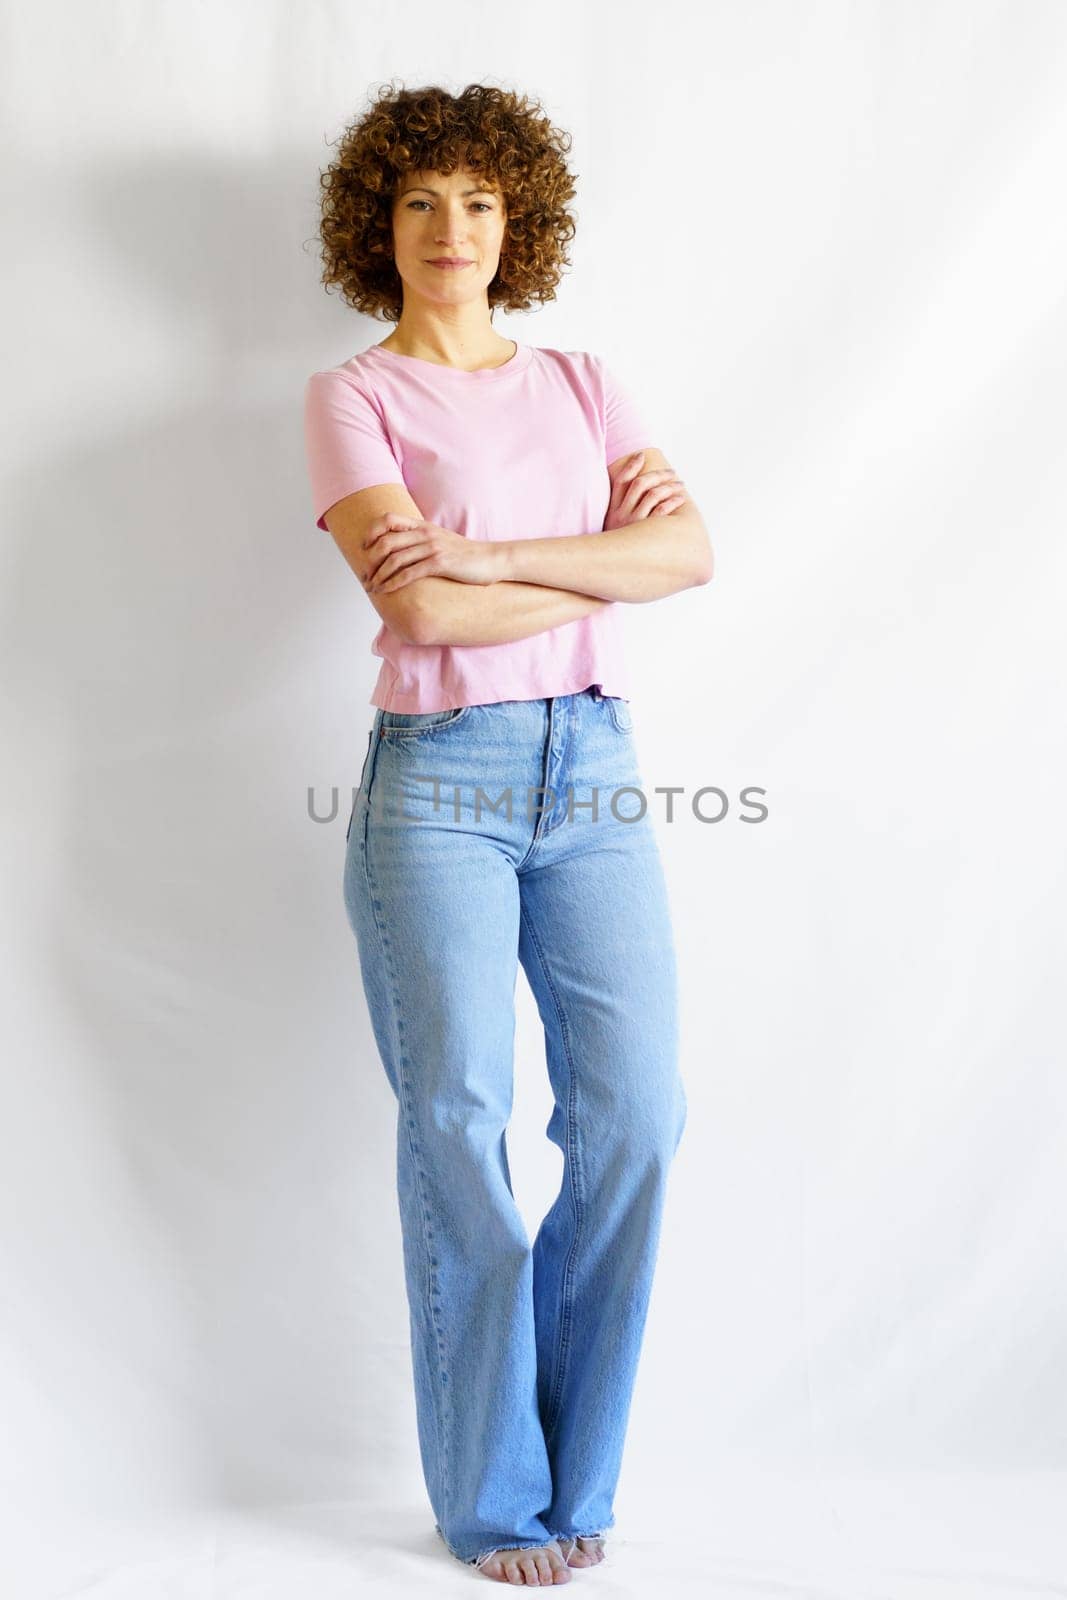 Full body of woman with curly hair standing against white wall crossing arms by javiindy